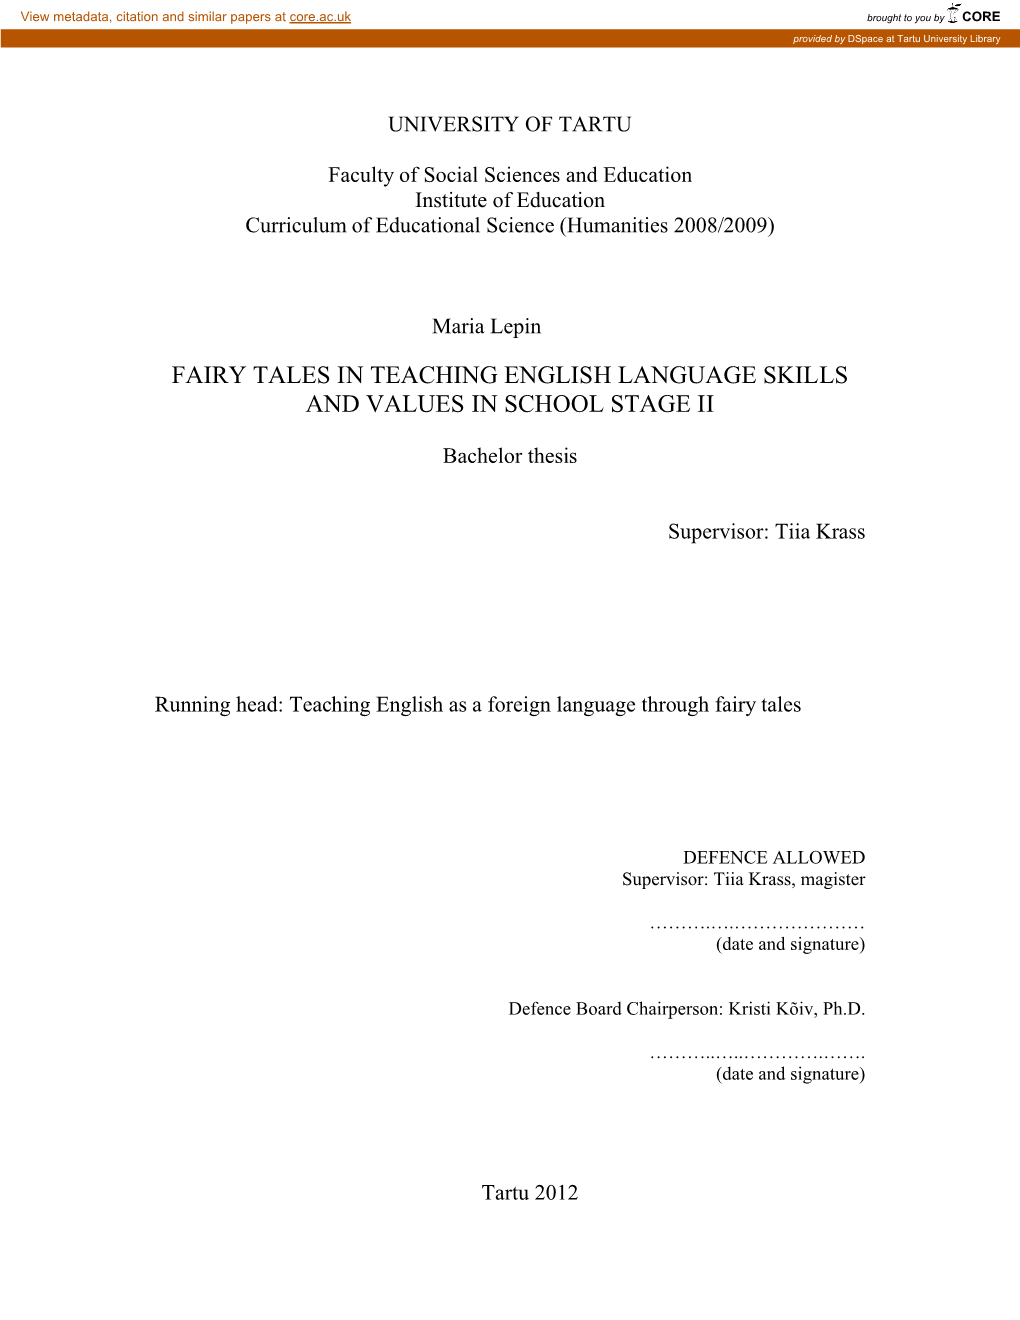 Fairy Tales in Teaching English Language Skills and Values in School Stage Ii